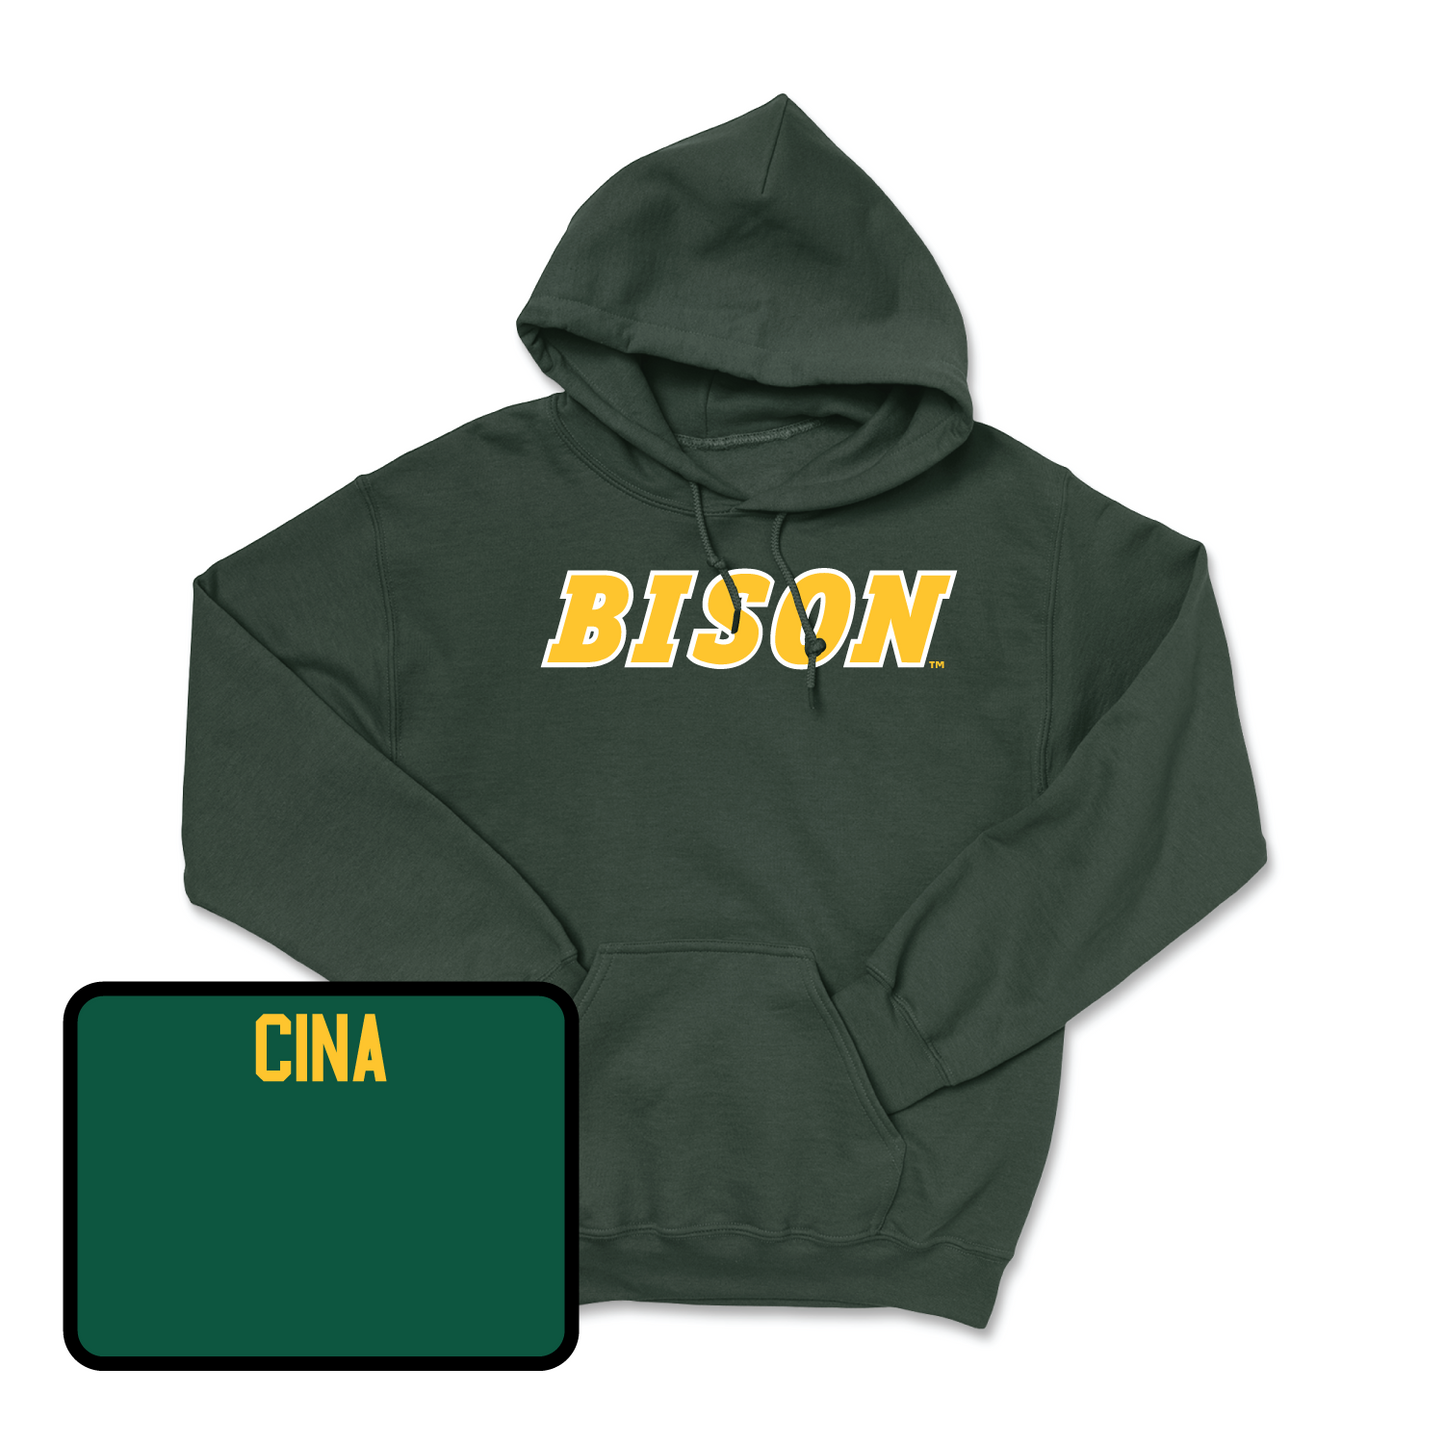 Green Track & Field Player Hoodie Youth Large / Brooke Cina